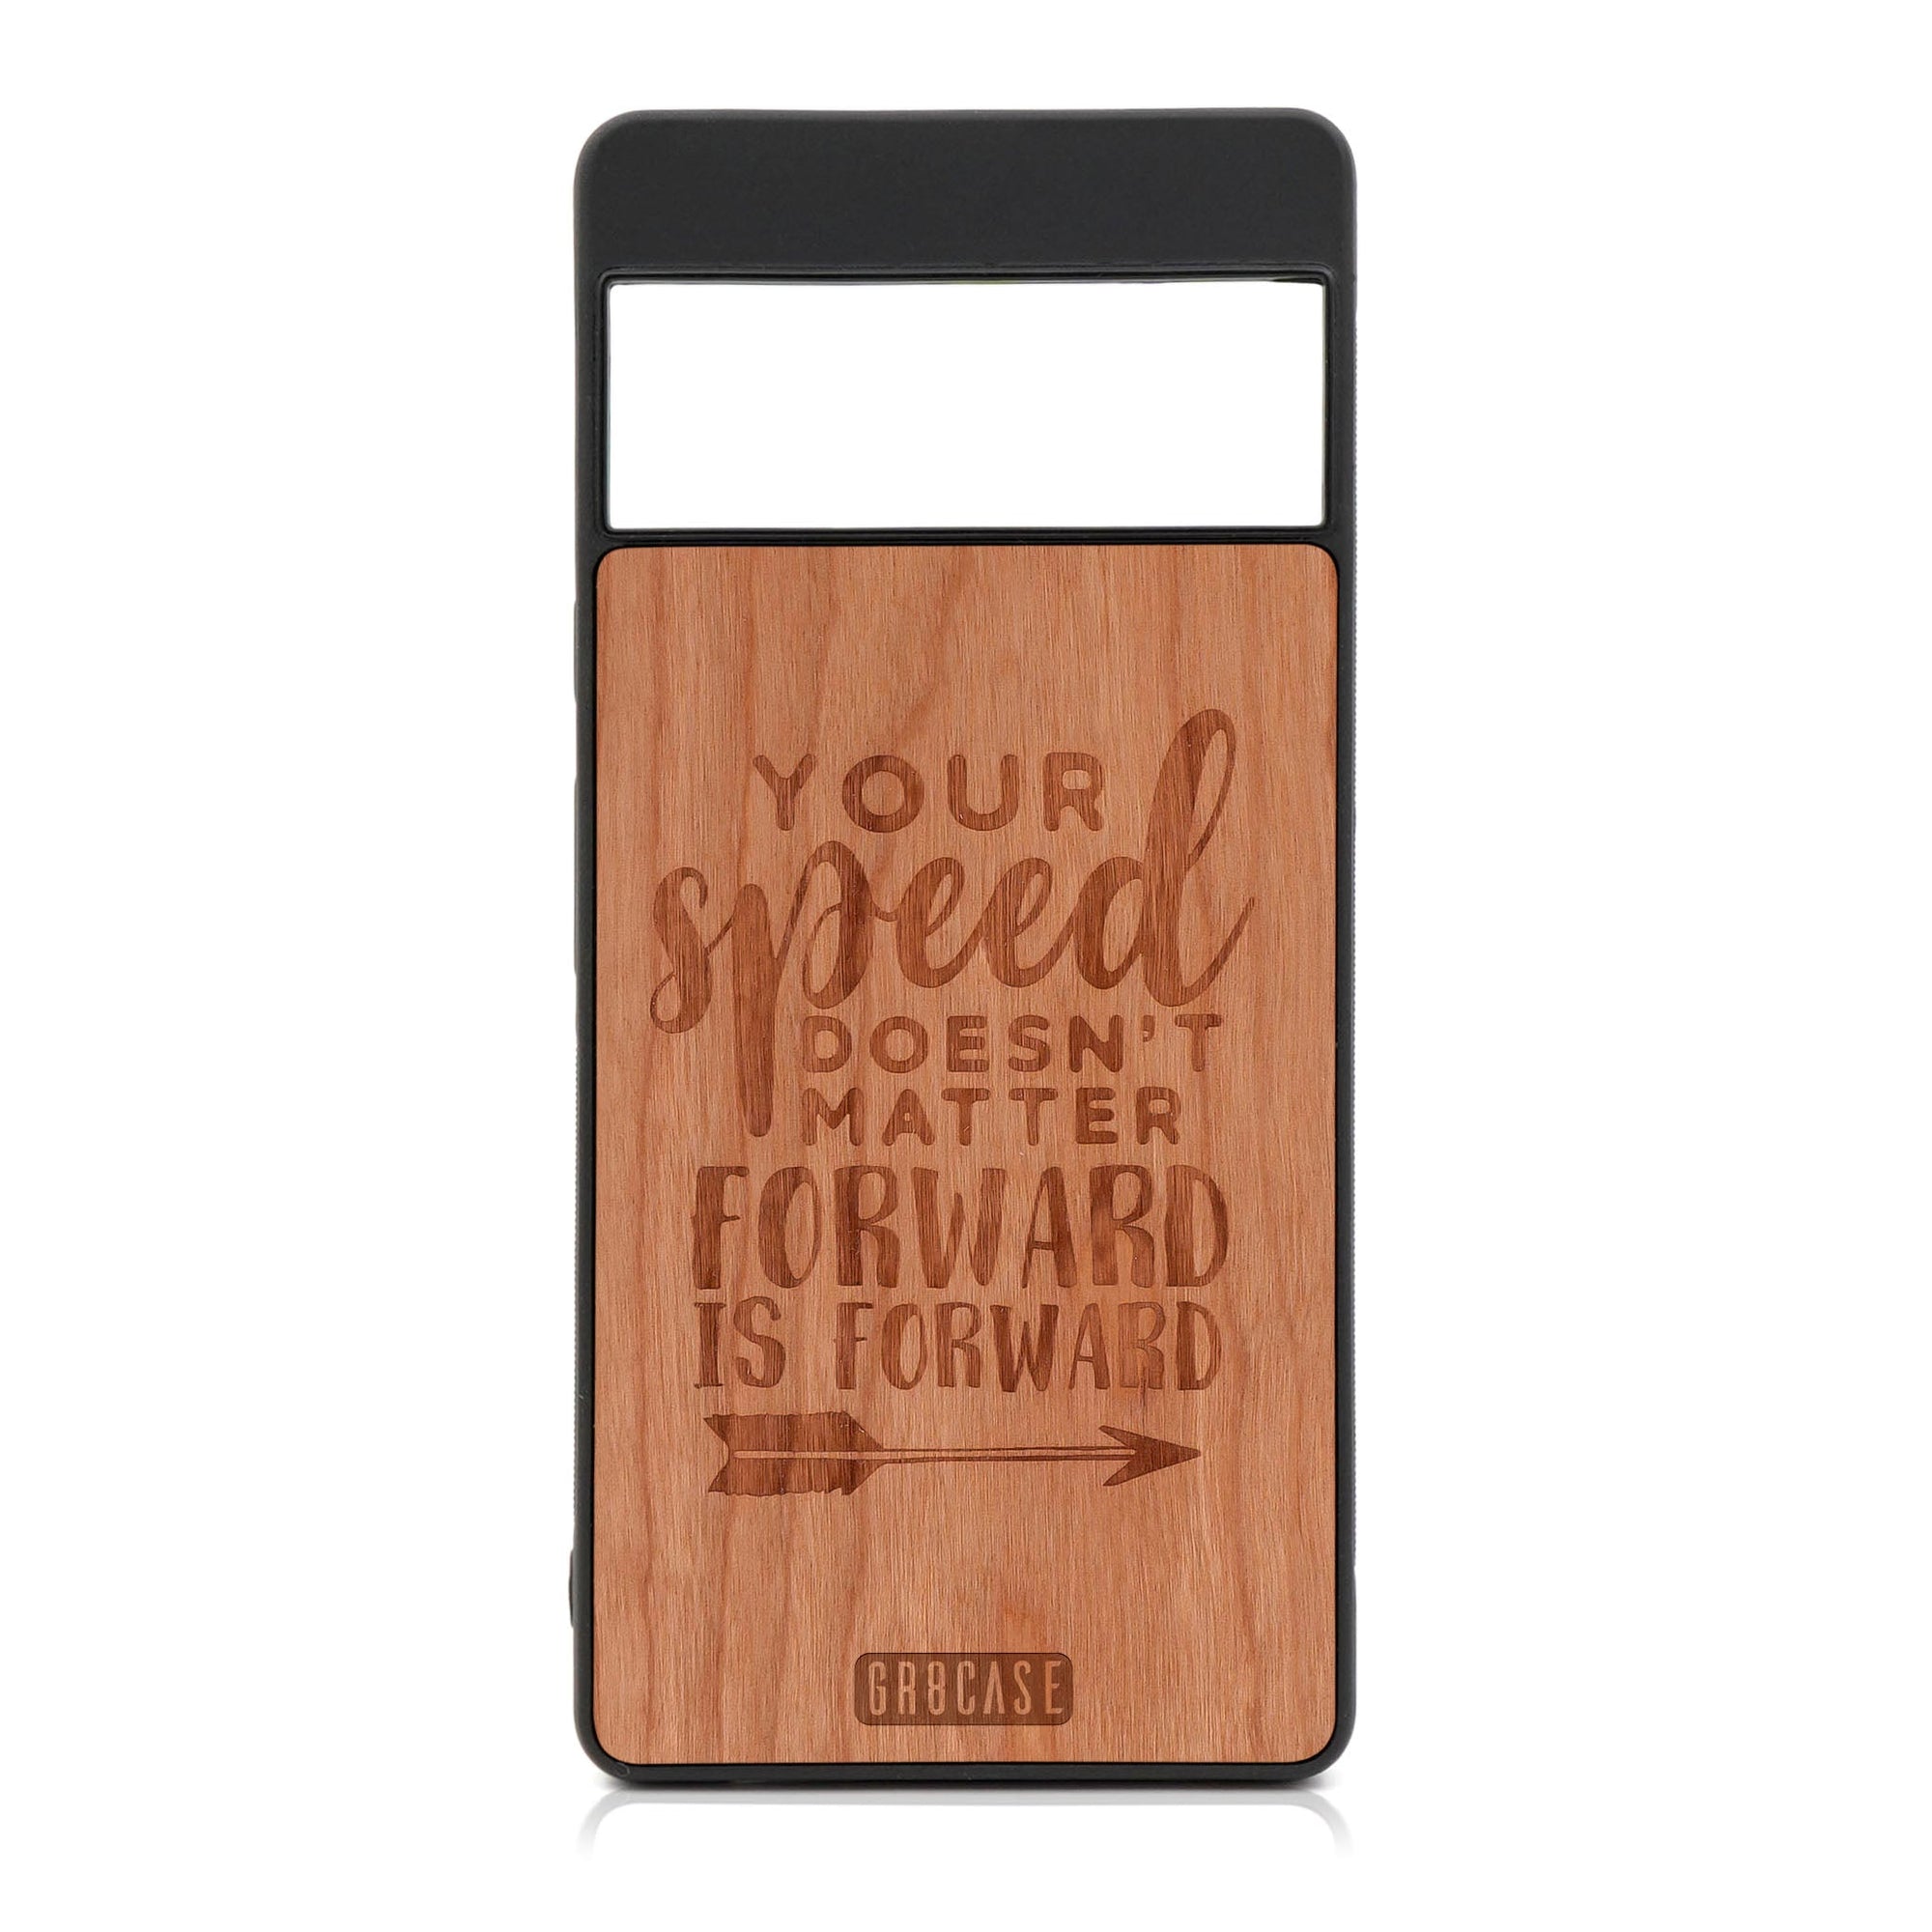 Your Speed Doesn't Matter Forward Is Forward Design Wood Case For Google Pixel 6 Pro